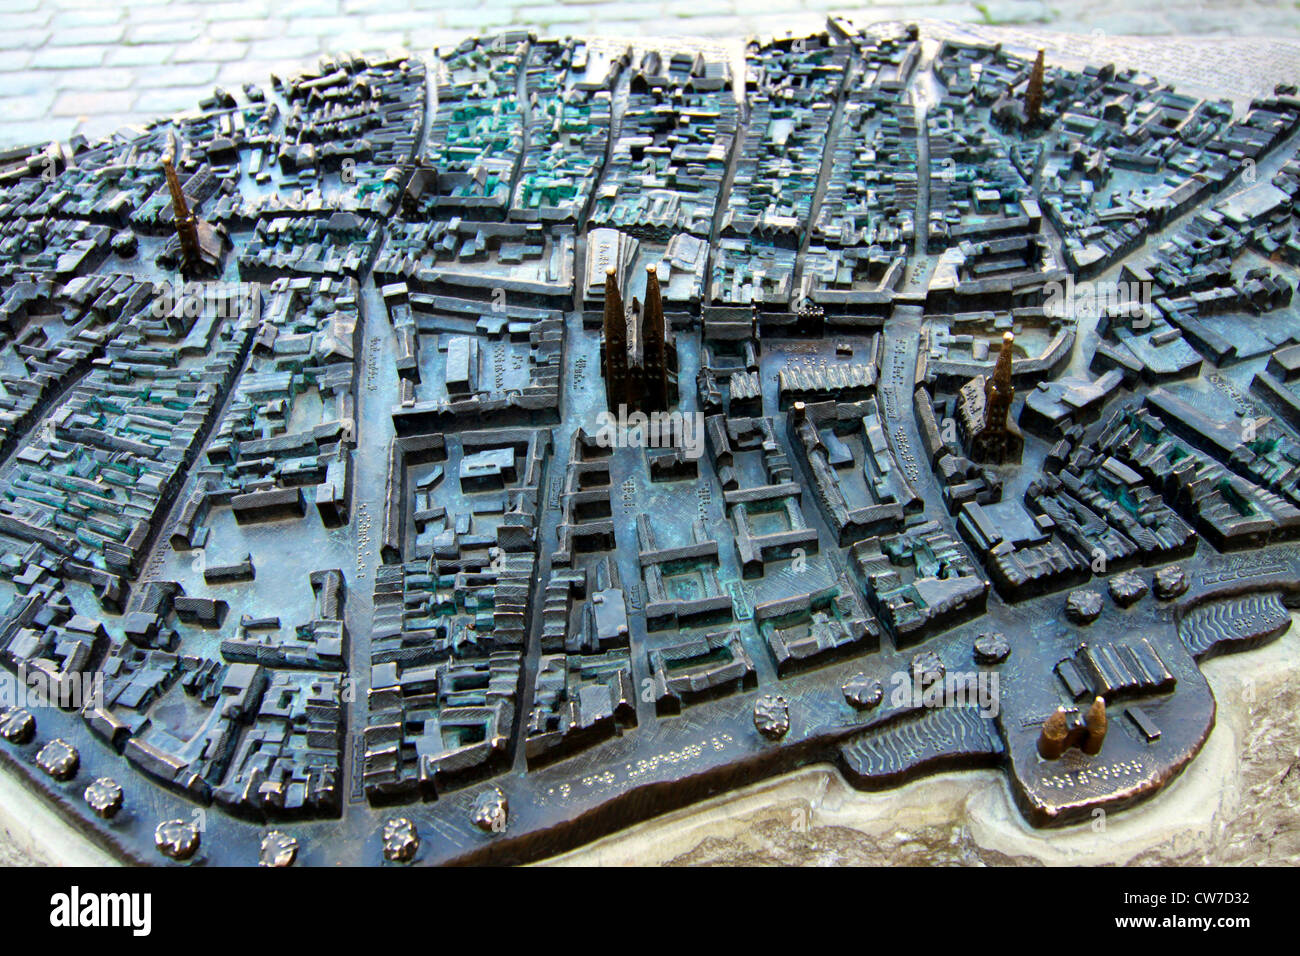 view on a public miniature model of the city centre made of metal, Germany, Schleswig-Holstein, Luebeck Stock Photo